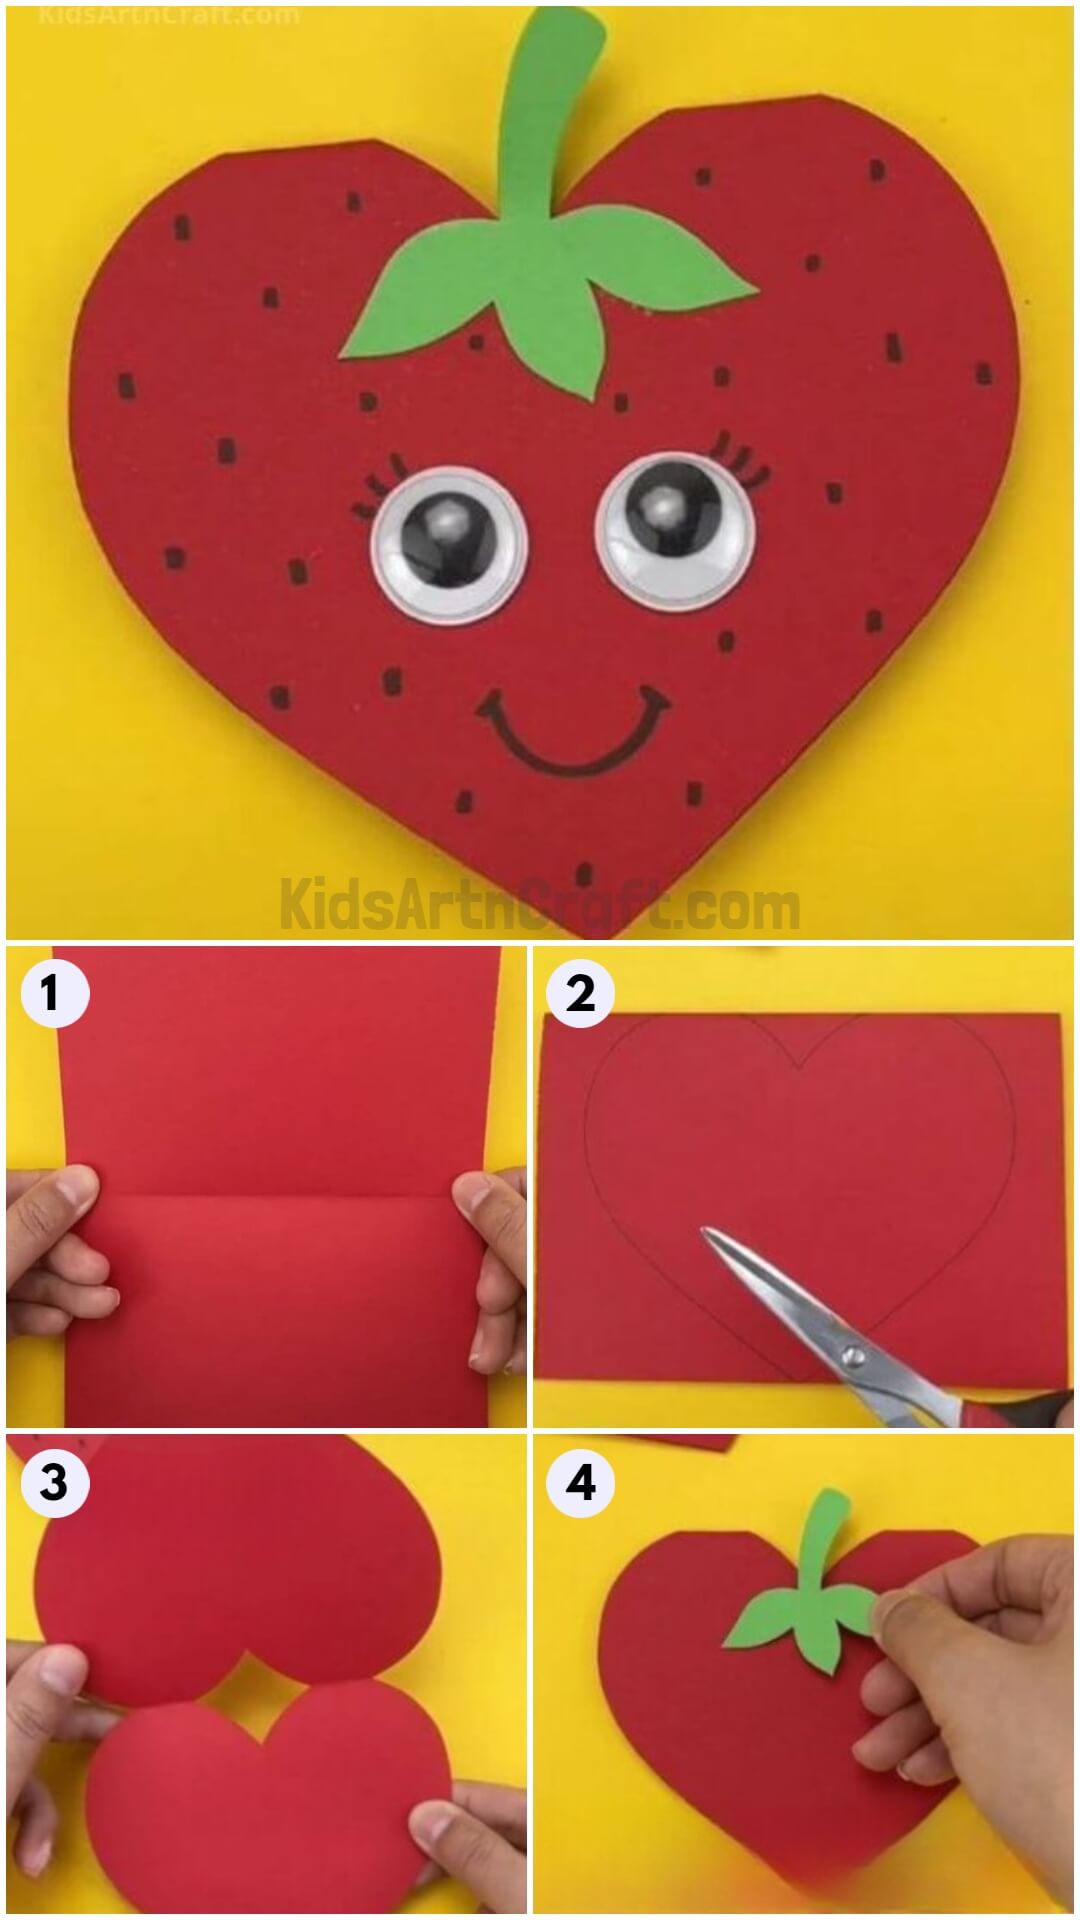 How to Make Paper Strawberry - Step by Step Instructions